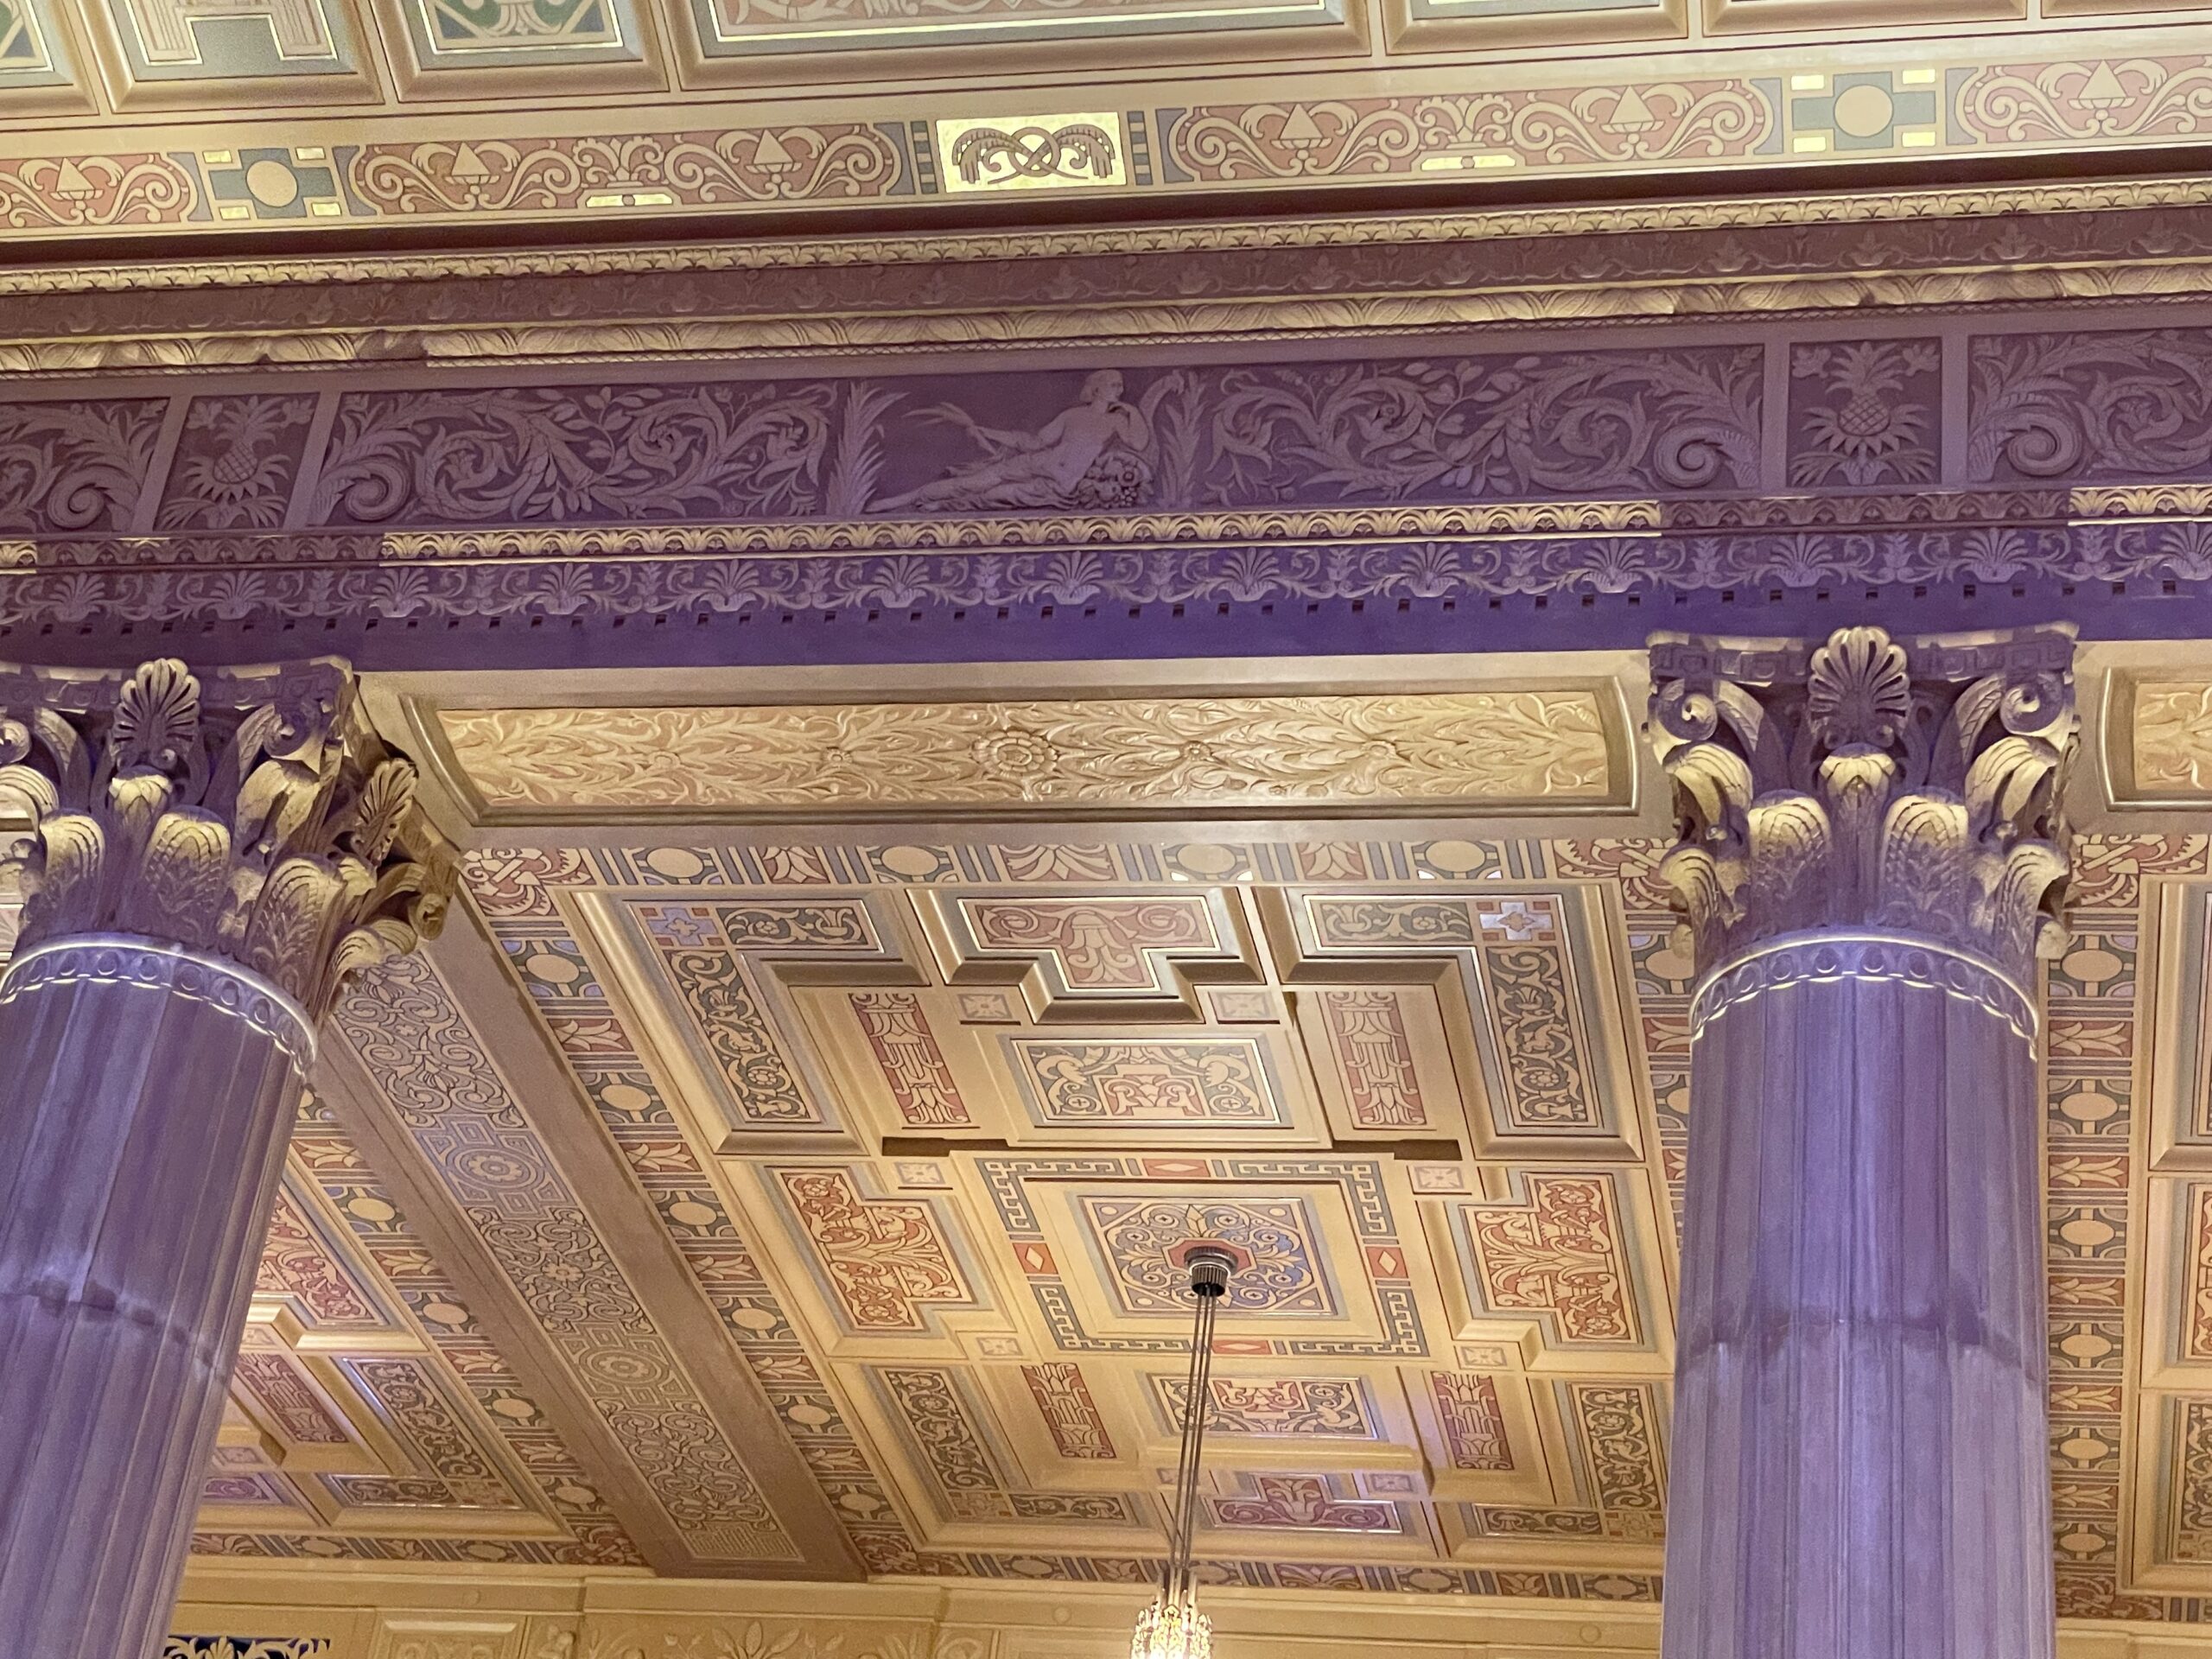 COLUMNS AND CEILING